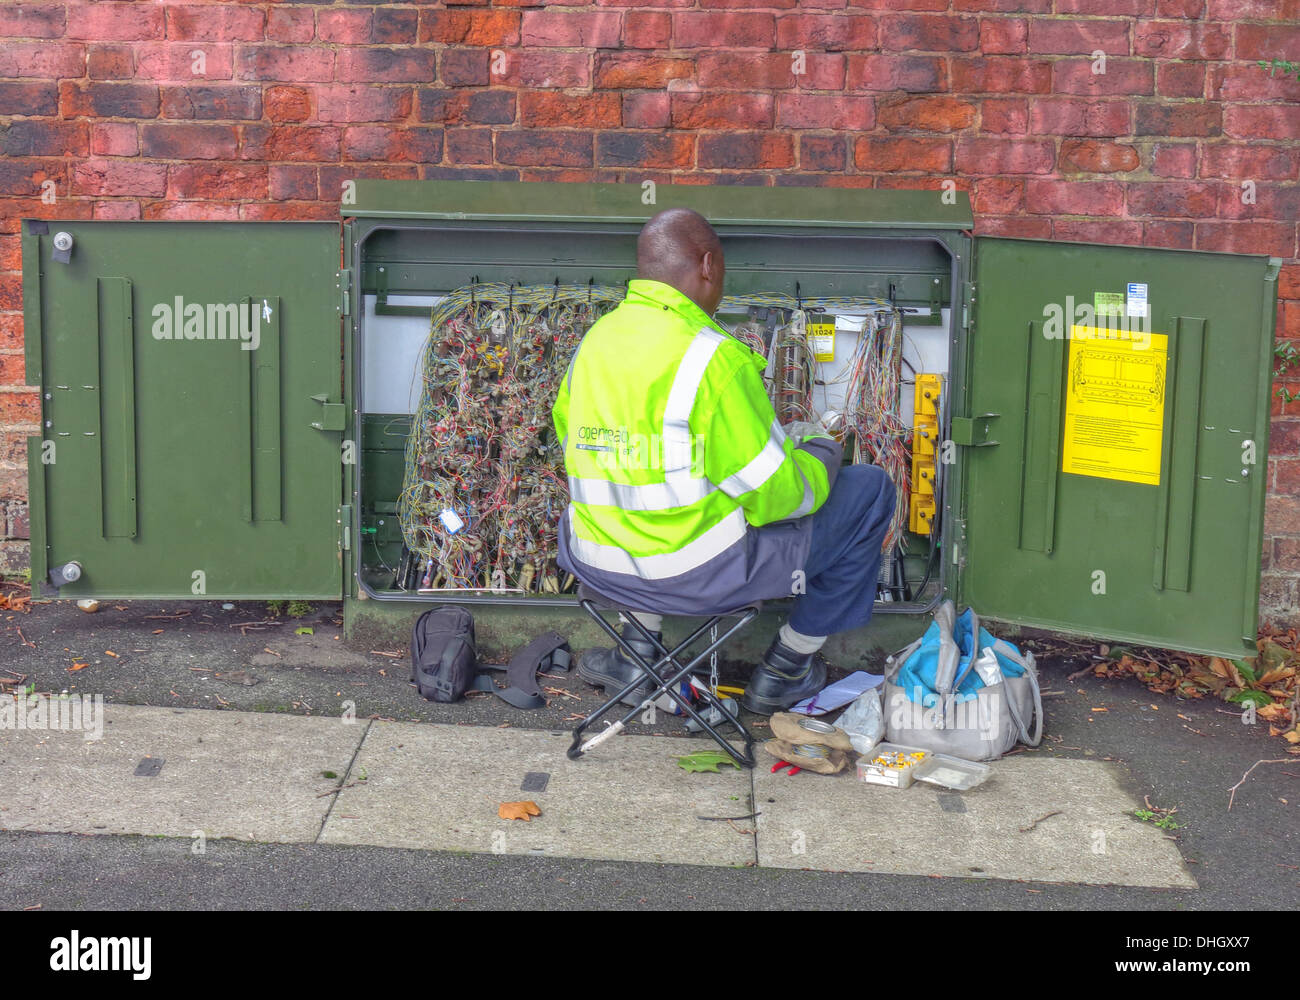 BT Openreach telecoms engineer ,fixing fault, in green roadside cabinet box, Walsall, West Midlands, England, UK Stock Photo